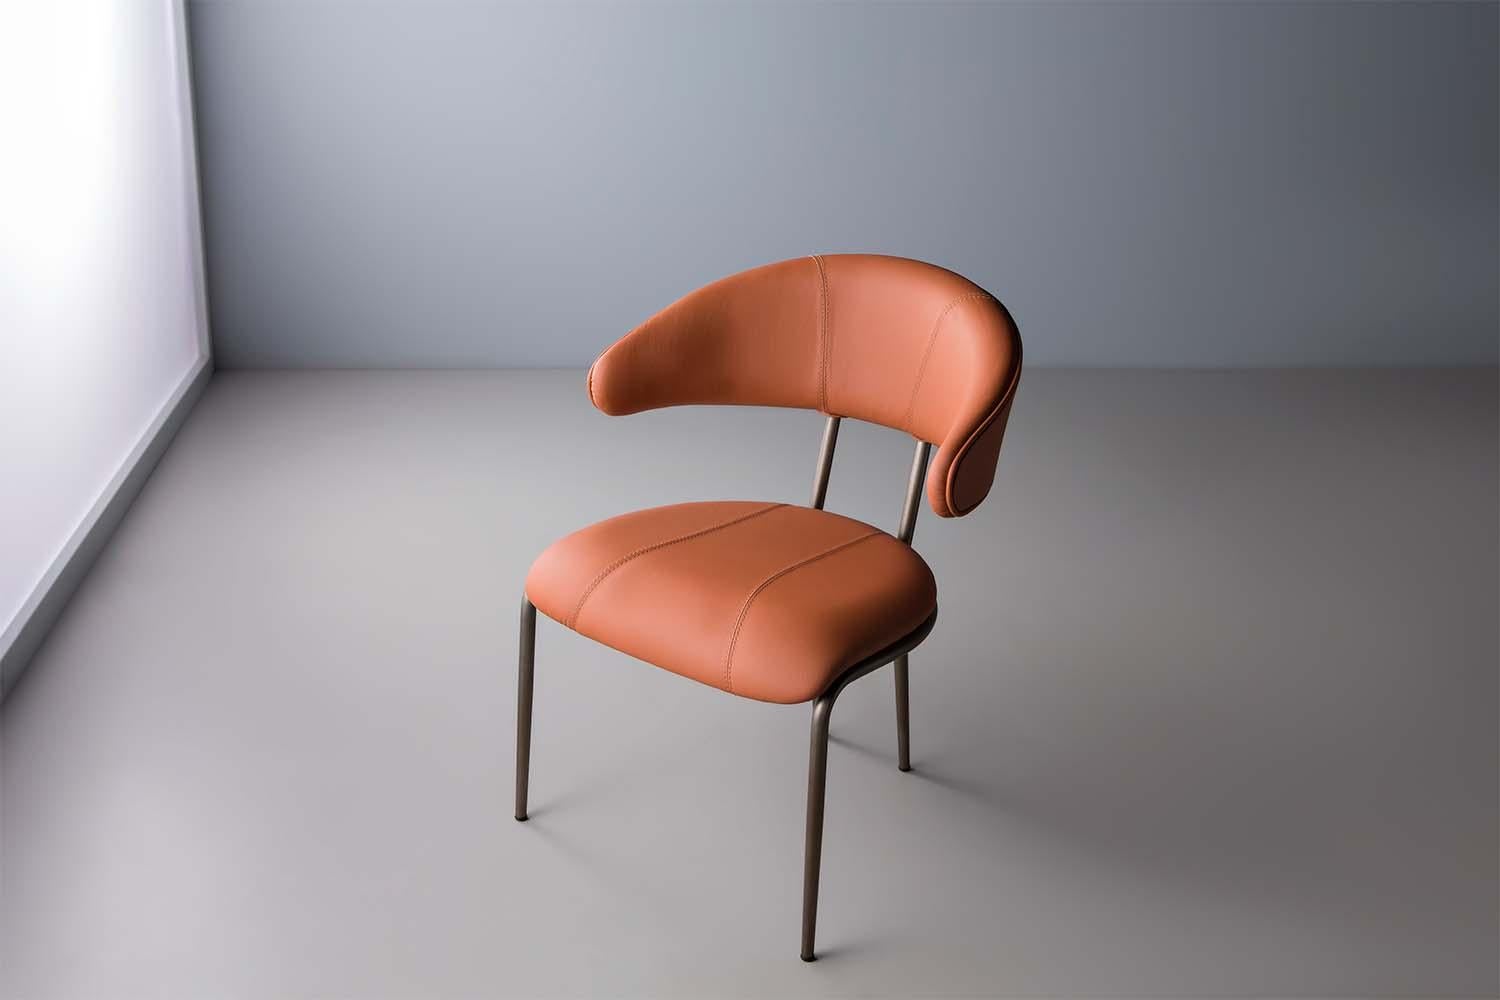 Mera Chair by Doimo Brasil
Dimensions: W 61 x D 60 x H 79 cm 
Materials: Metal, upholstered seat. 


With the intention of providing good taste and personality, Doimo deciphers trends and follows the evolution of man and his space. To this end, it